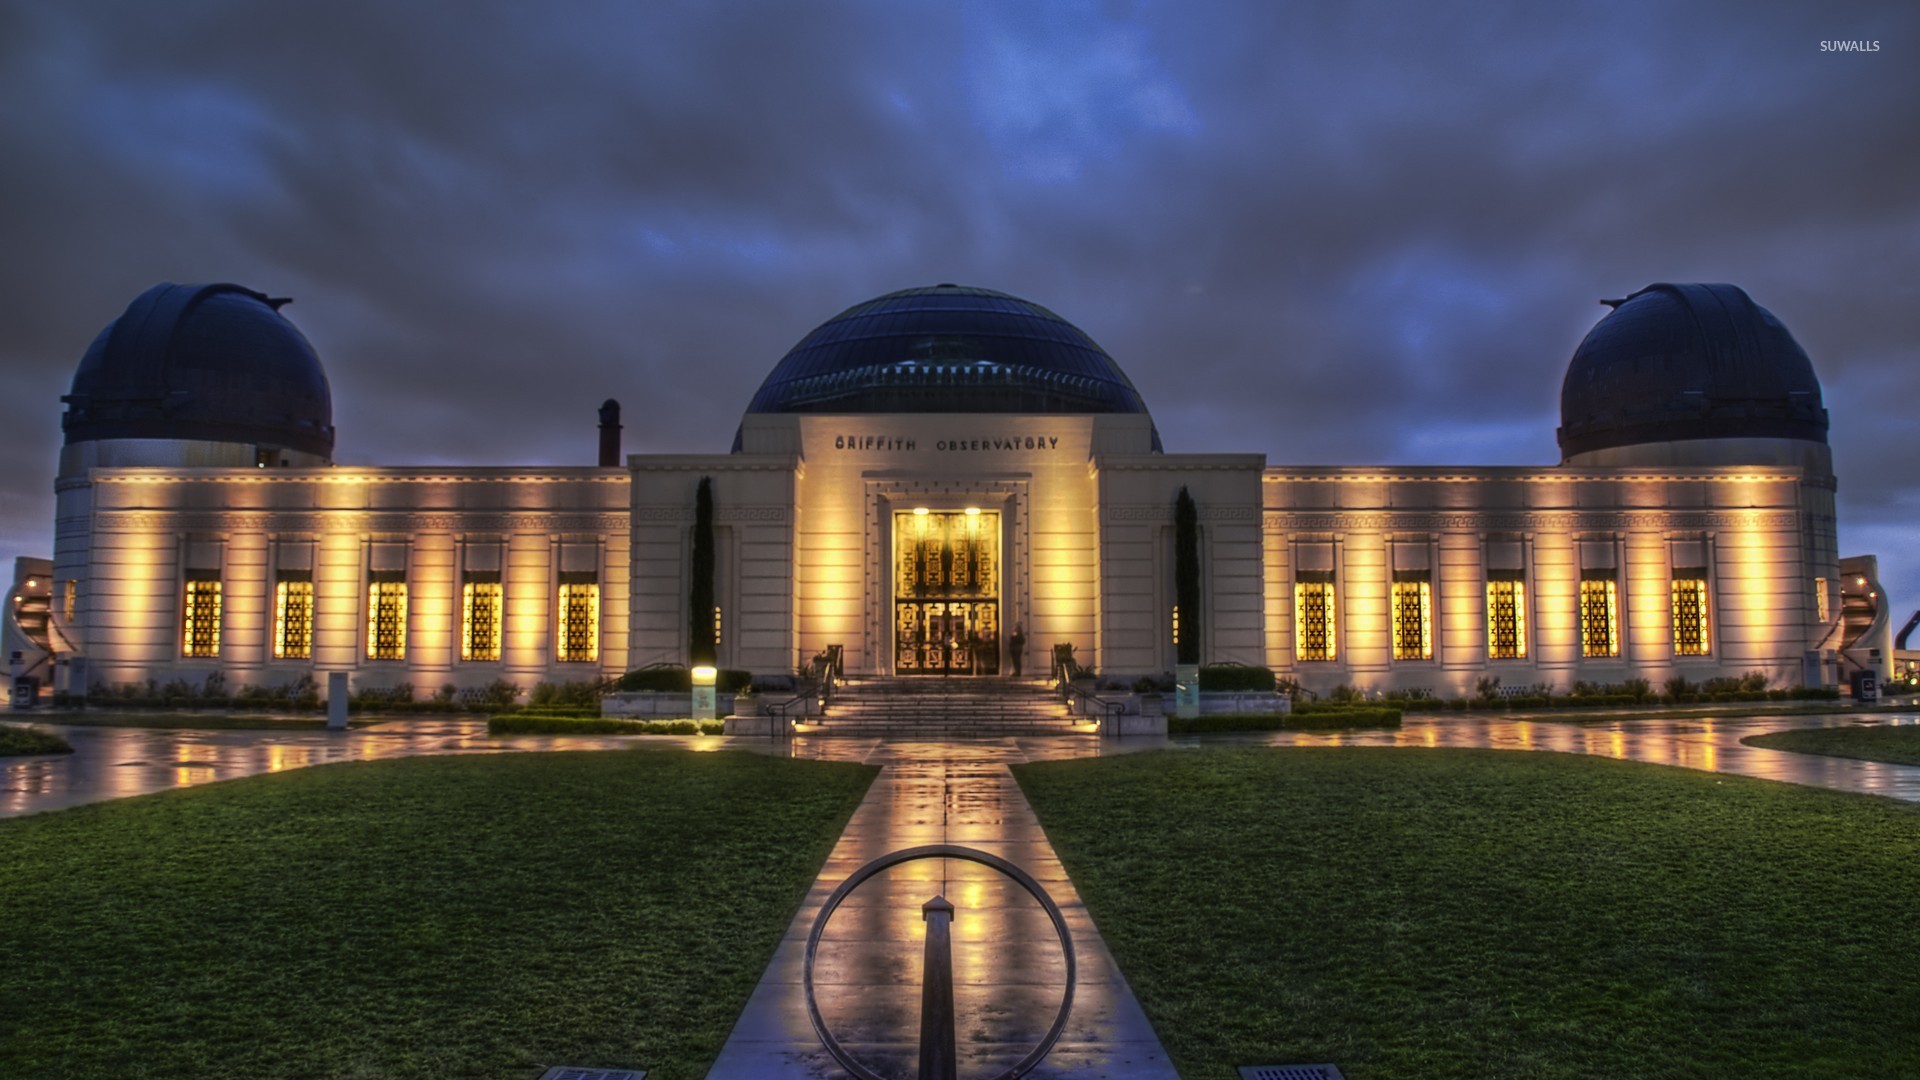 Griffith Observatory Wallpaper World